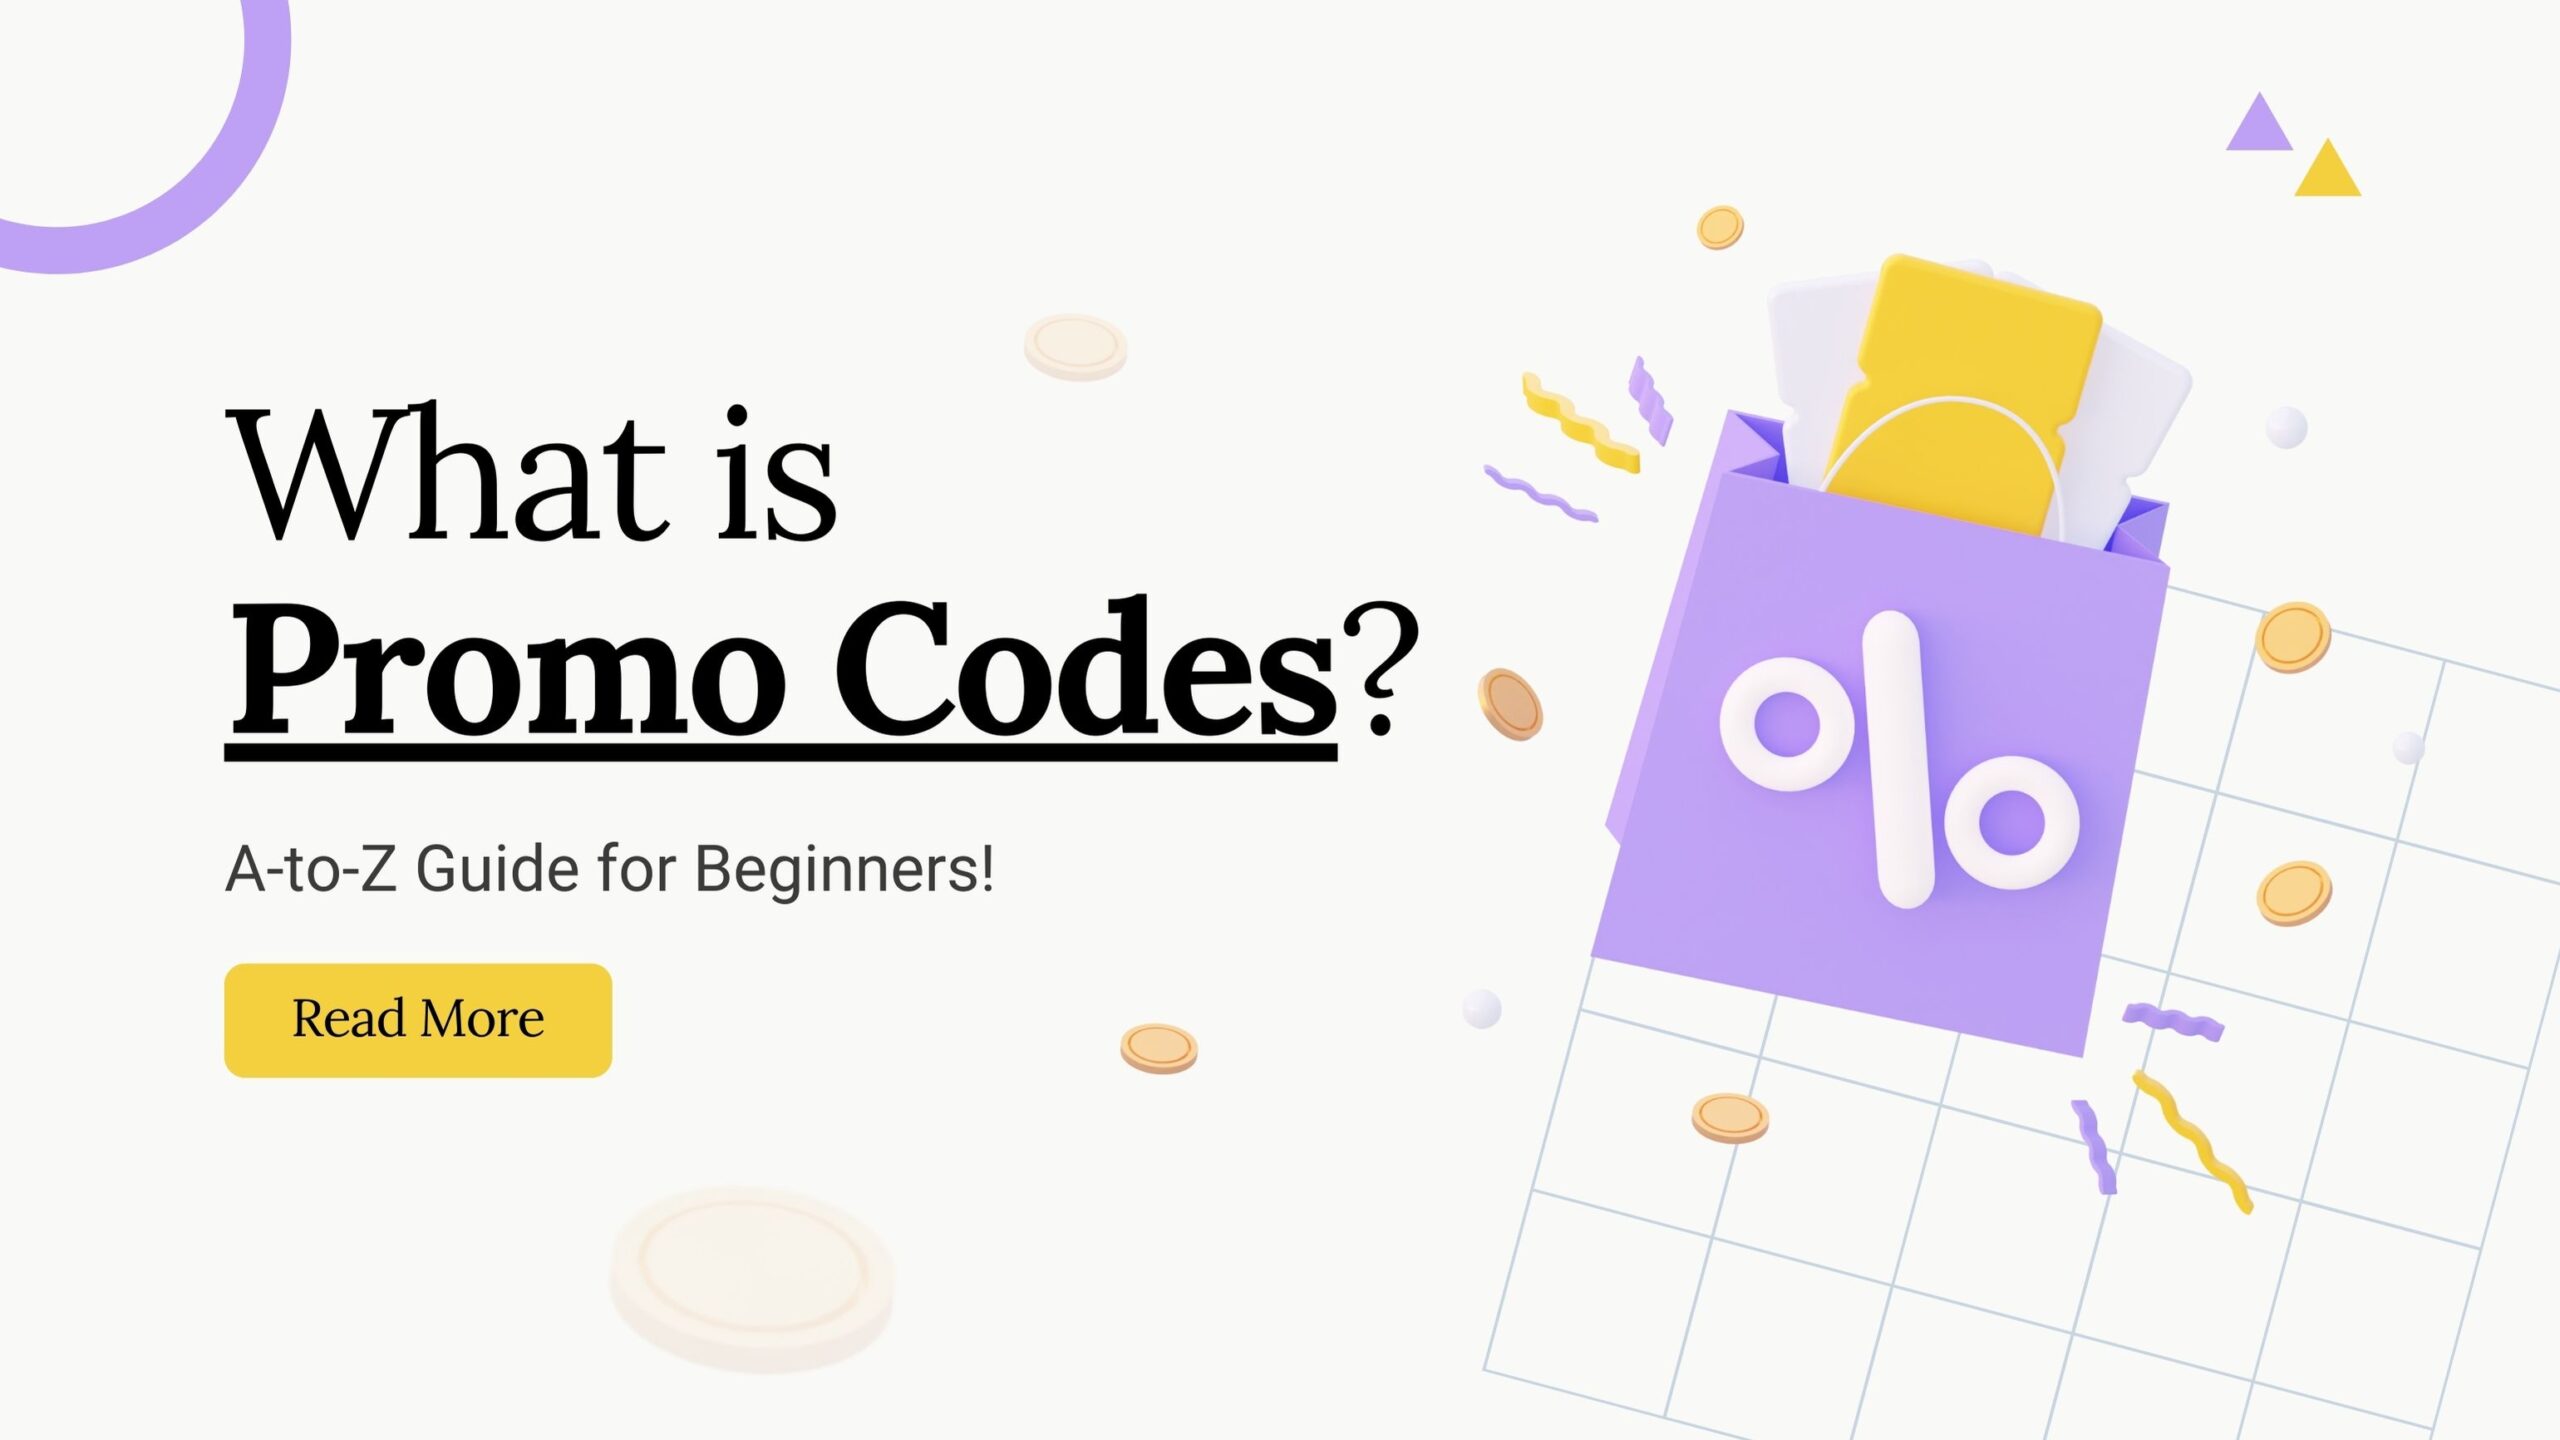 What is Promo Codes